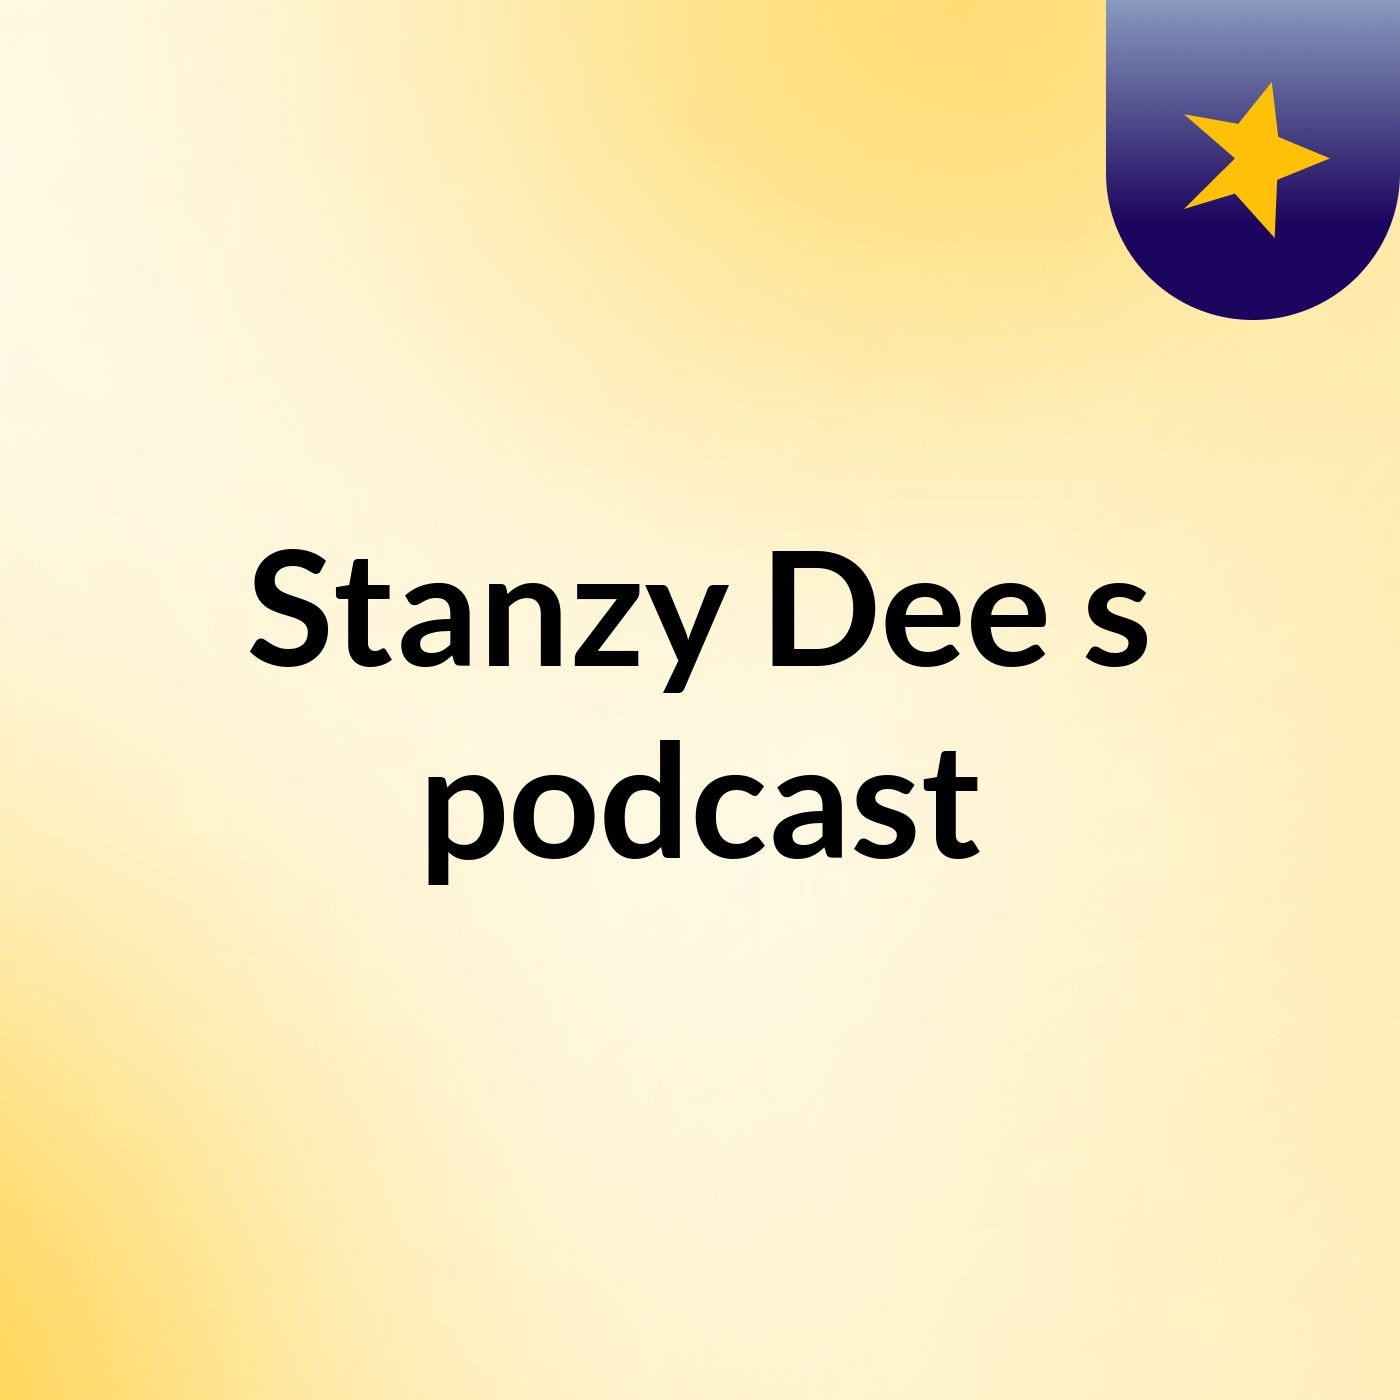 Episode 3 - Stanzy Dee's podcast